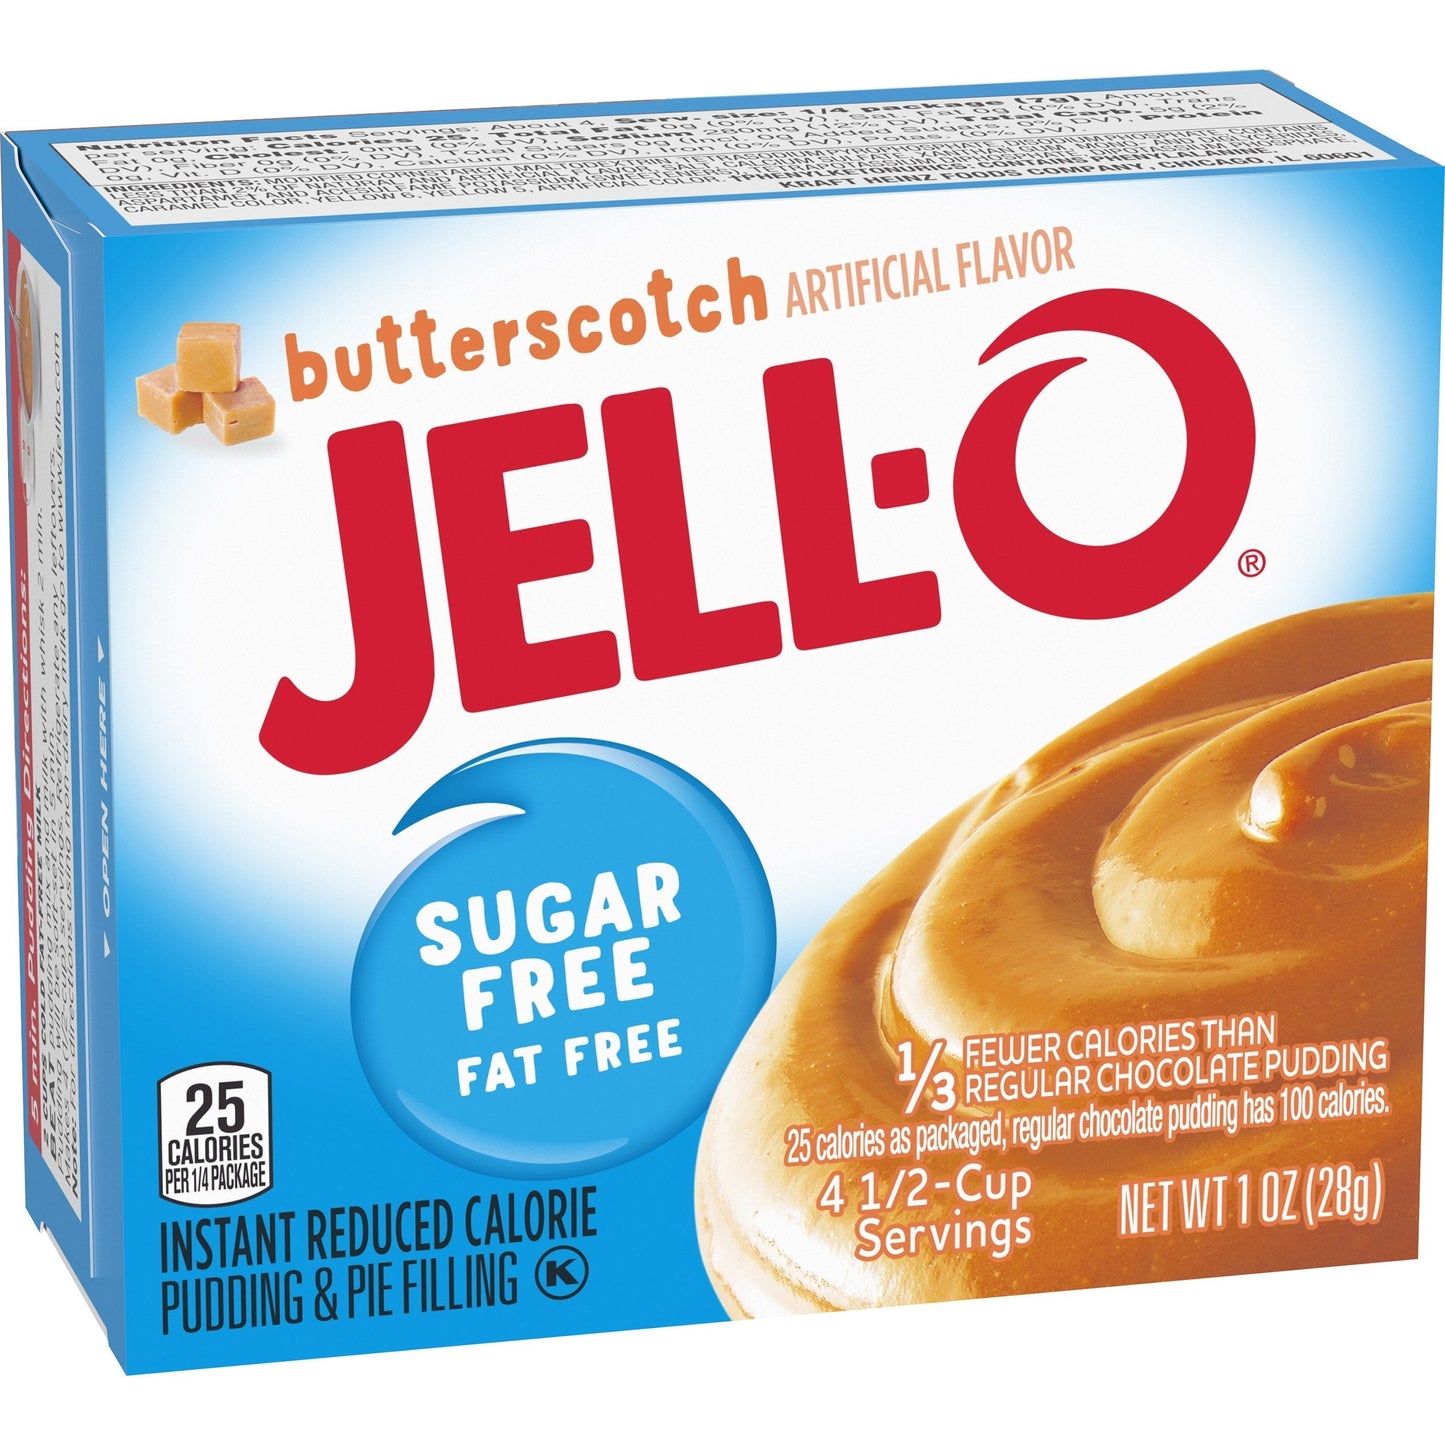 Jell-O Instant Sugar Free Fat Free Butterscotch Pudding & Pie Filling 28g